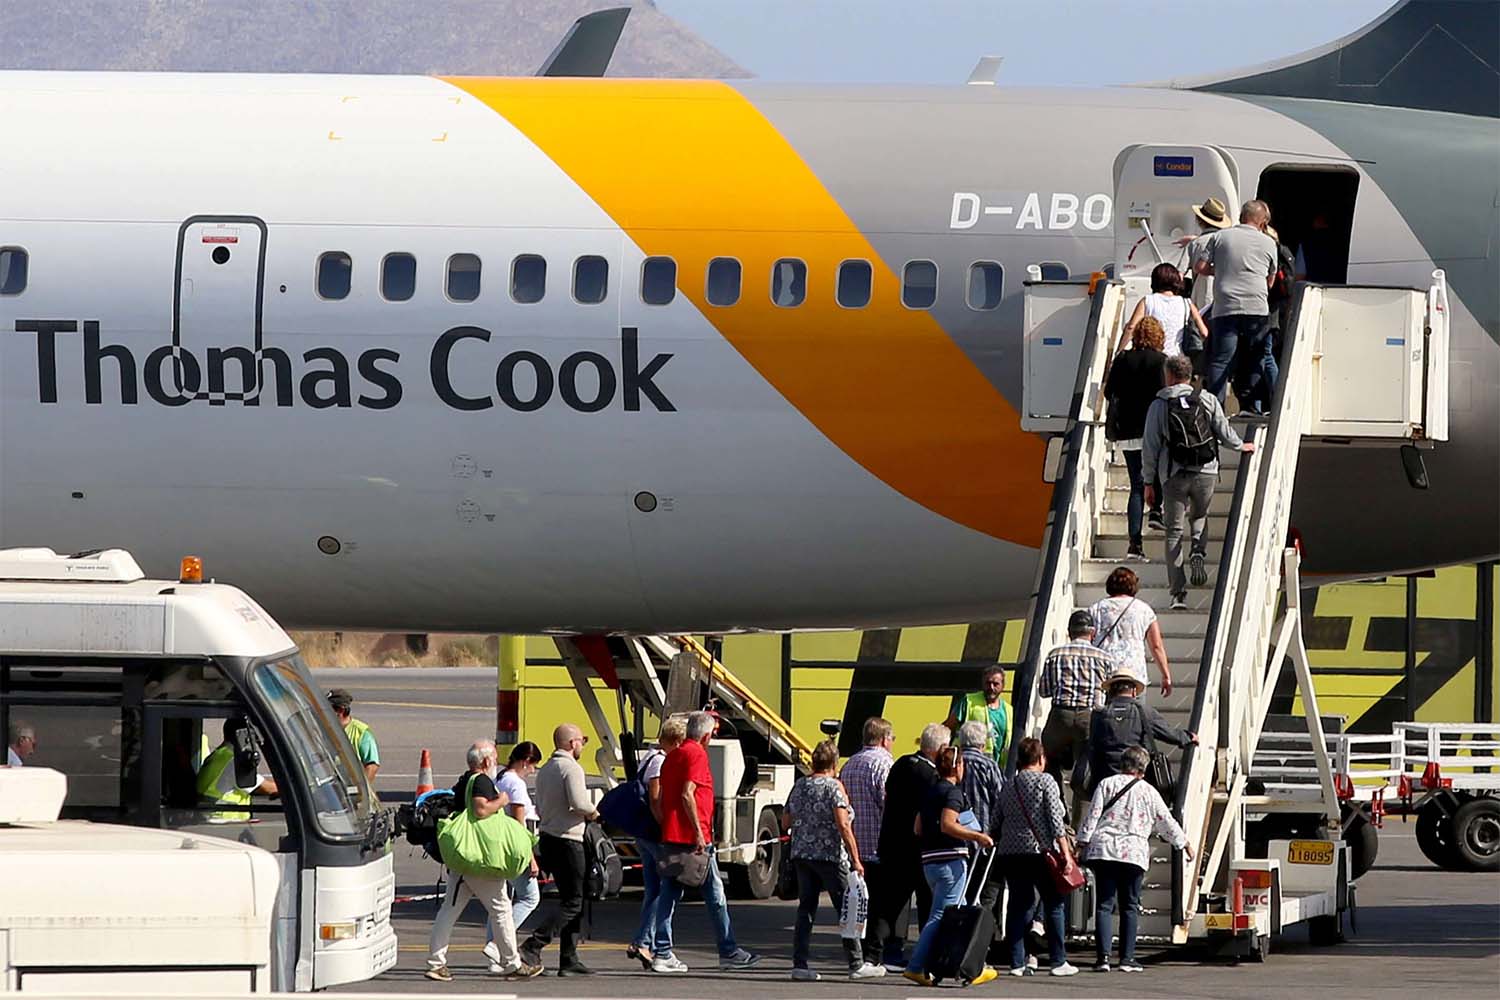 Thomas Cook, the world's older travel firm, is now history